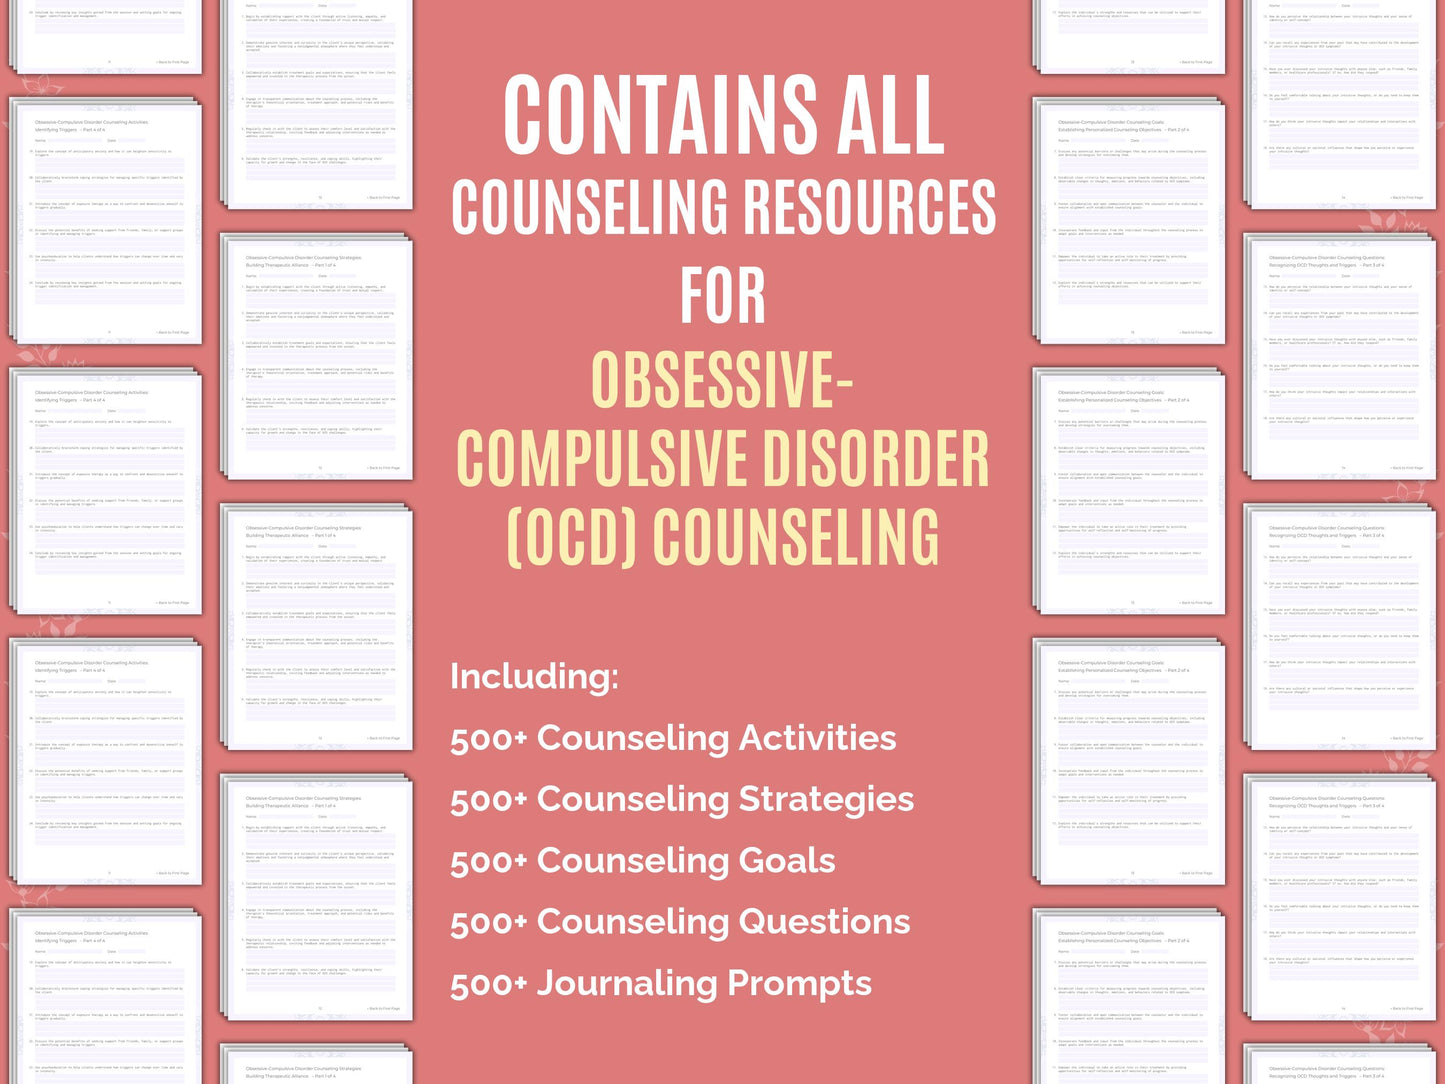 OCD Worksheet, OCD Workbook, Counselor, OCD Resource, Compulsive, OCD Bundle, Disorder, OCD Counseling, OCD Therapy, Therapist, Obsessive, Mental Health, OCD Template